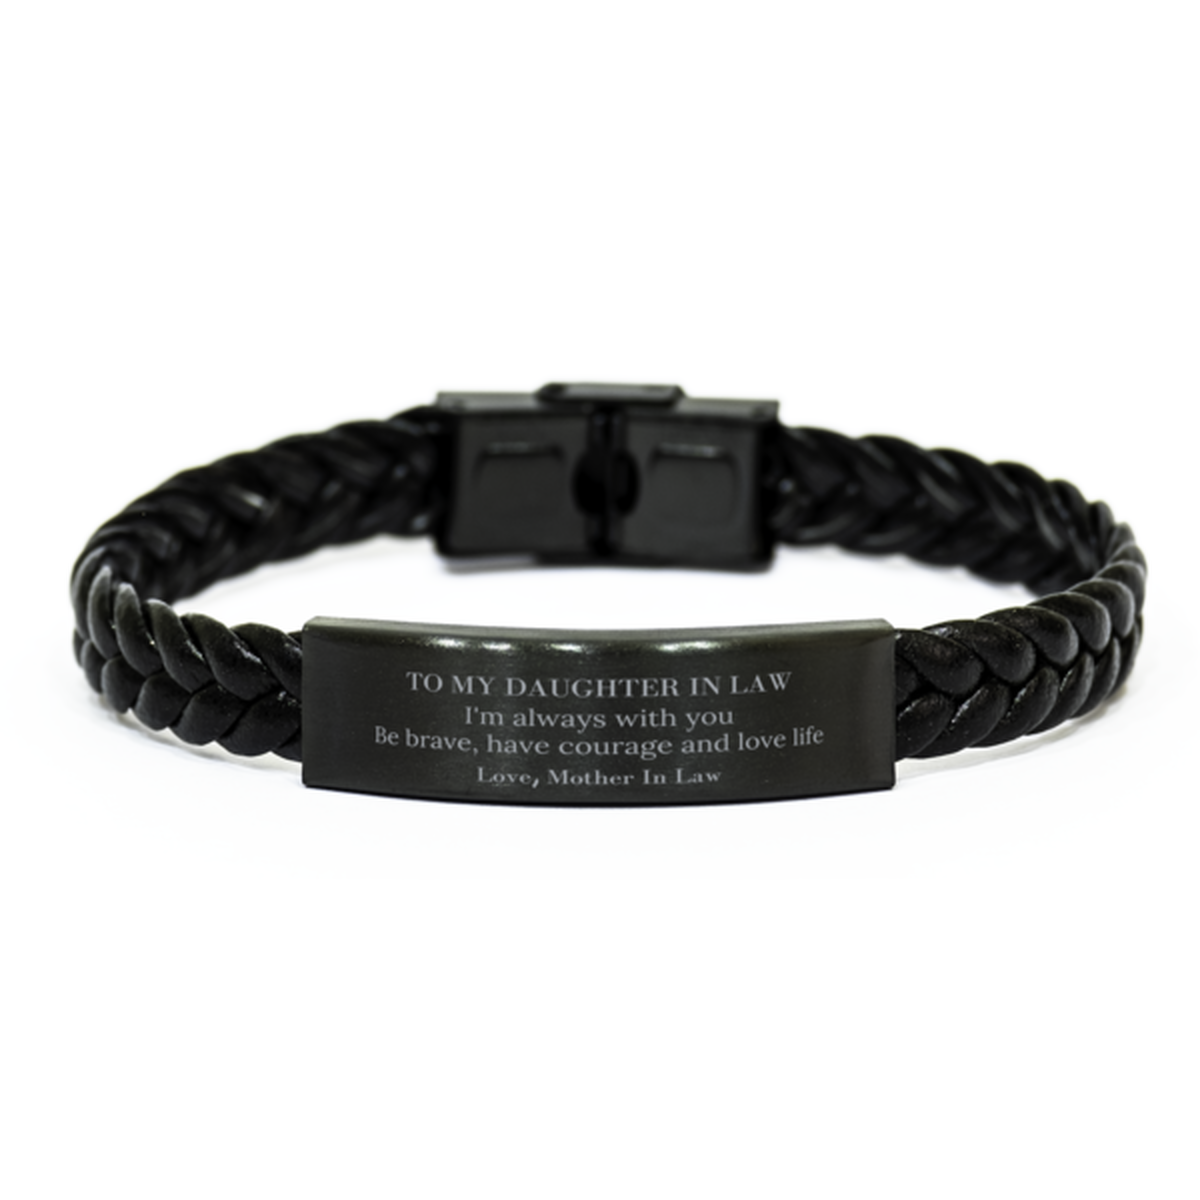 To My Daughter In Law Gifts from Mother In Law, Unique Braided Leather Bracelet Inspirational Christmas Birthday Graduation Gifts for Daughter In Law I'm always with you. Be brave, have courage and love life. Love, Mother In Law